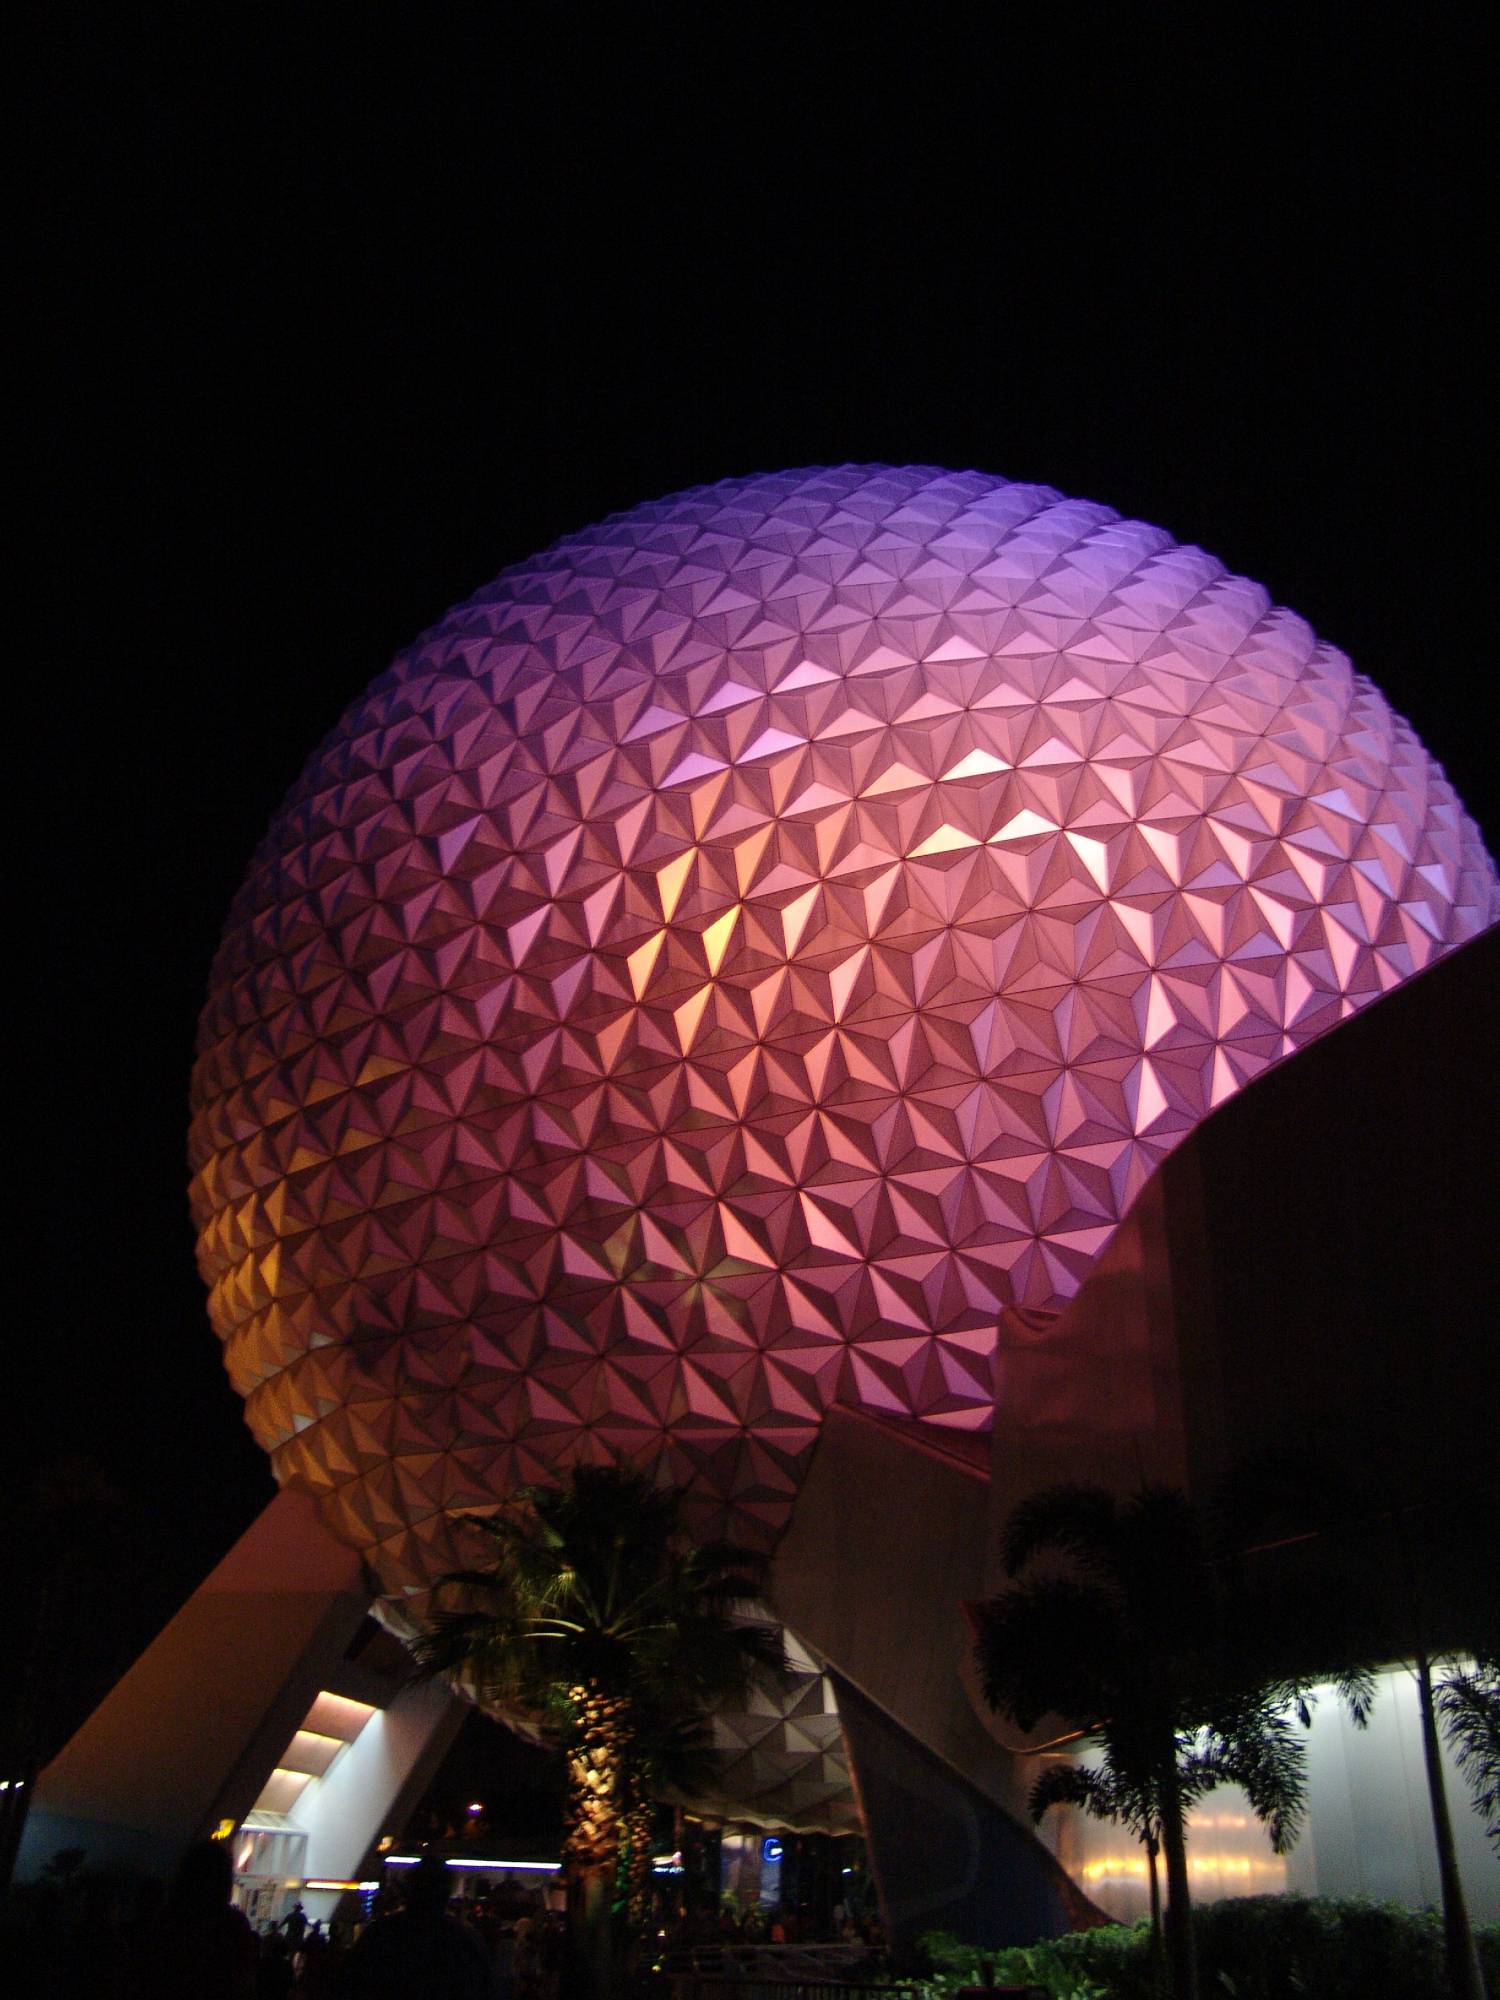 Go behind the scenes at Epcot with the Epcot Explorer's Encyclopaedia |PassPorter.com